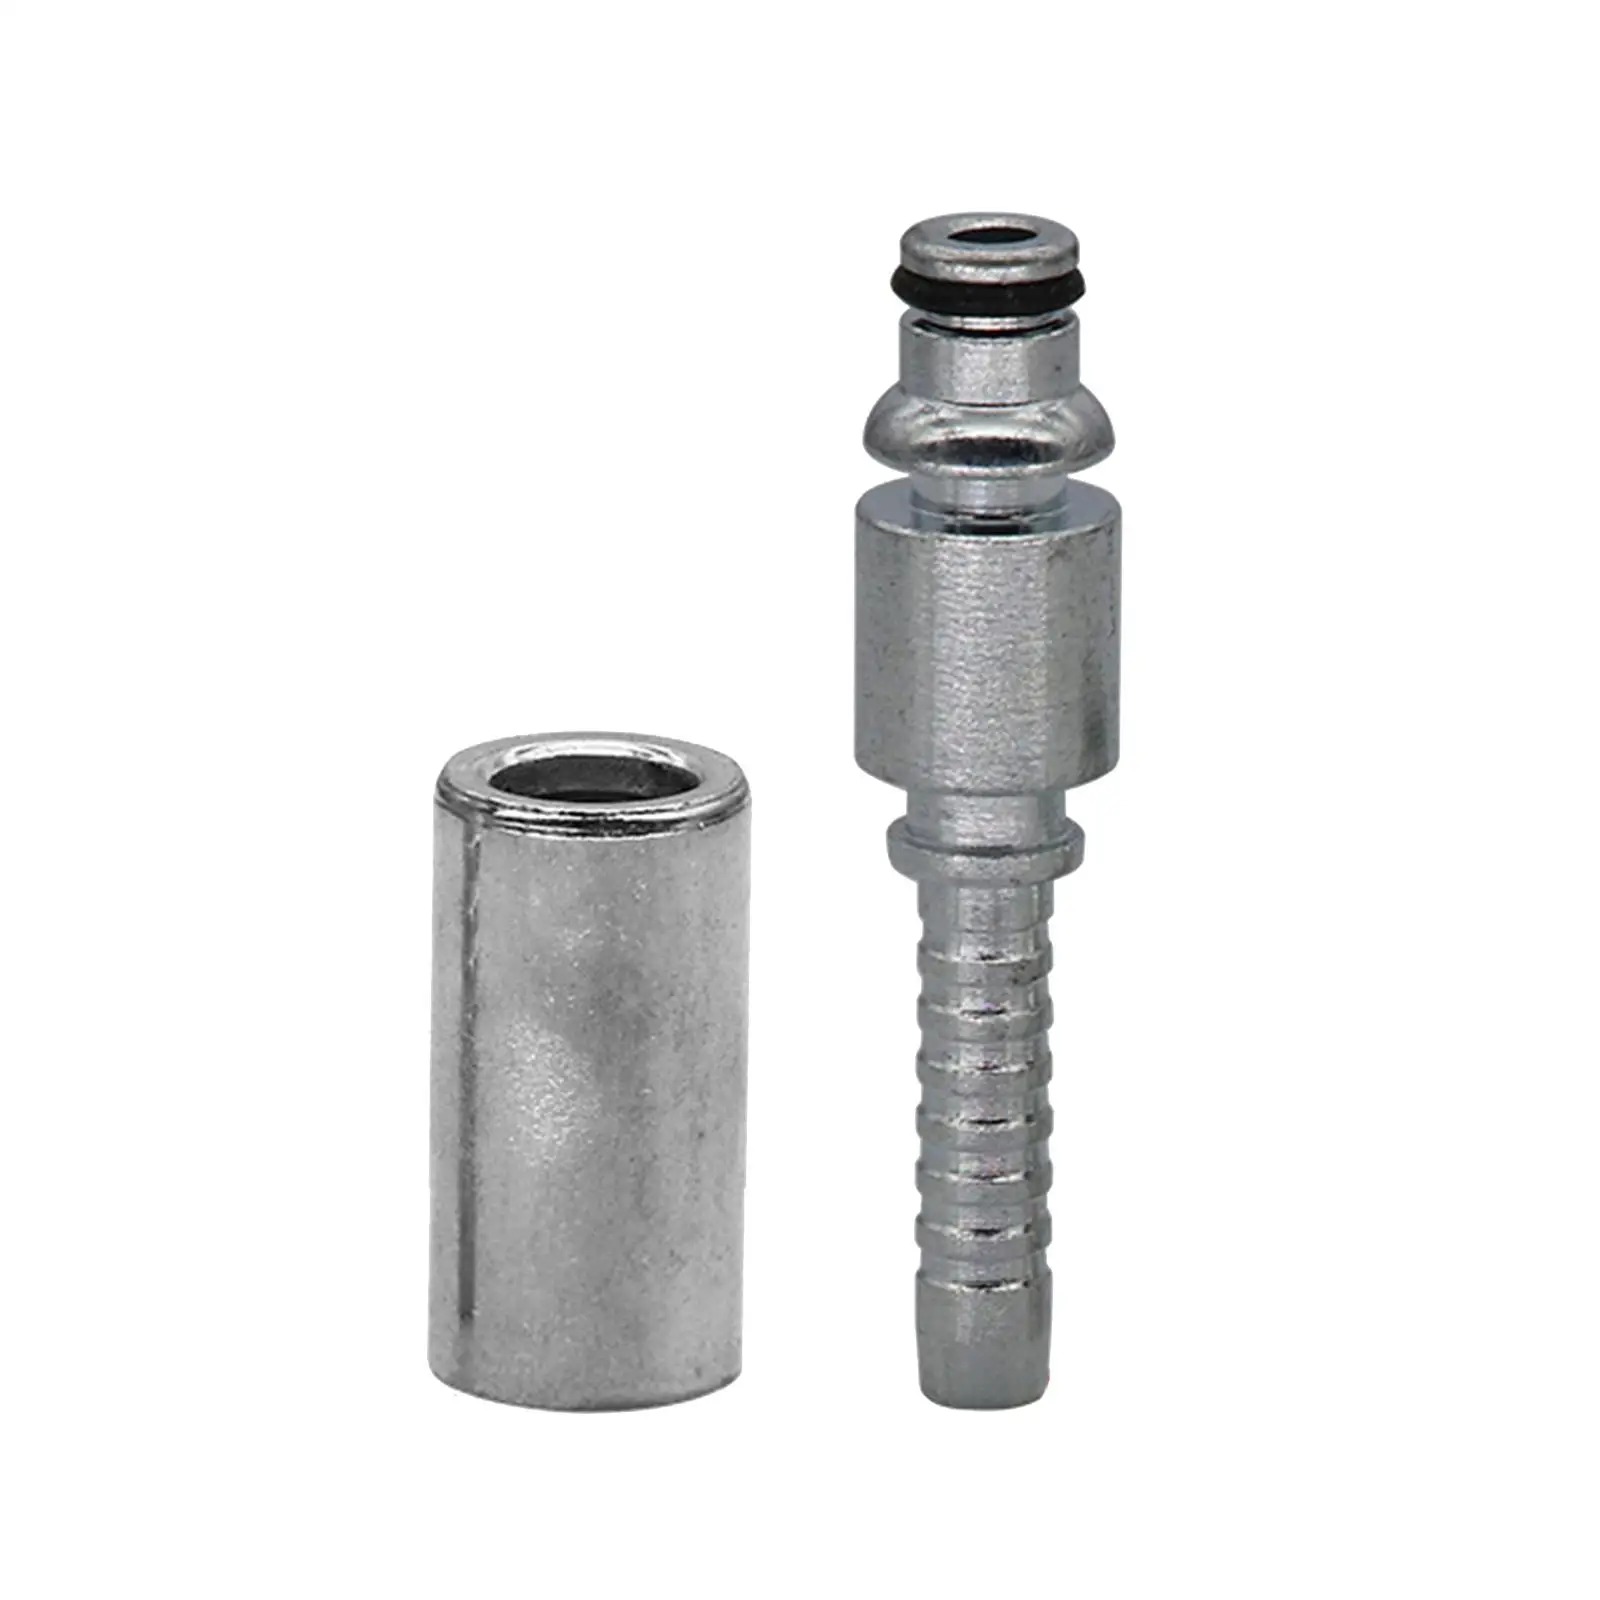 Car Washing Machine Pressure Pipe Joint Converter Repair Fitting with Sleeve Pressure Washer Pipe Tip Hose Plug Connector